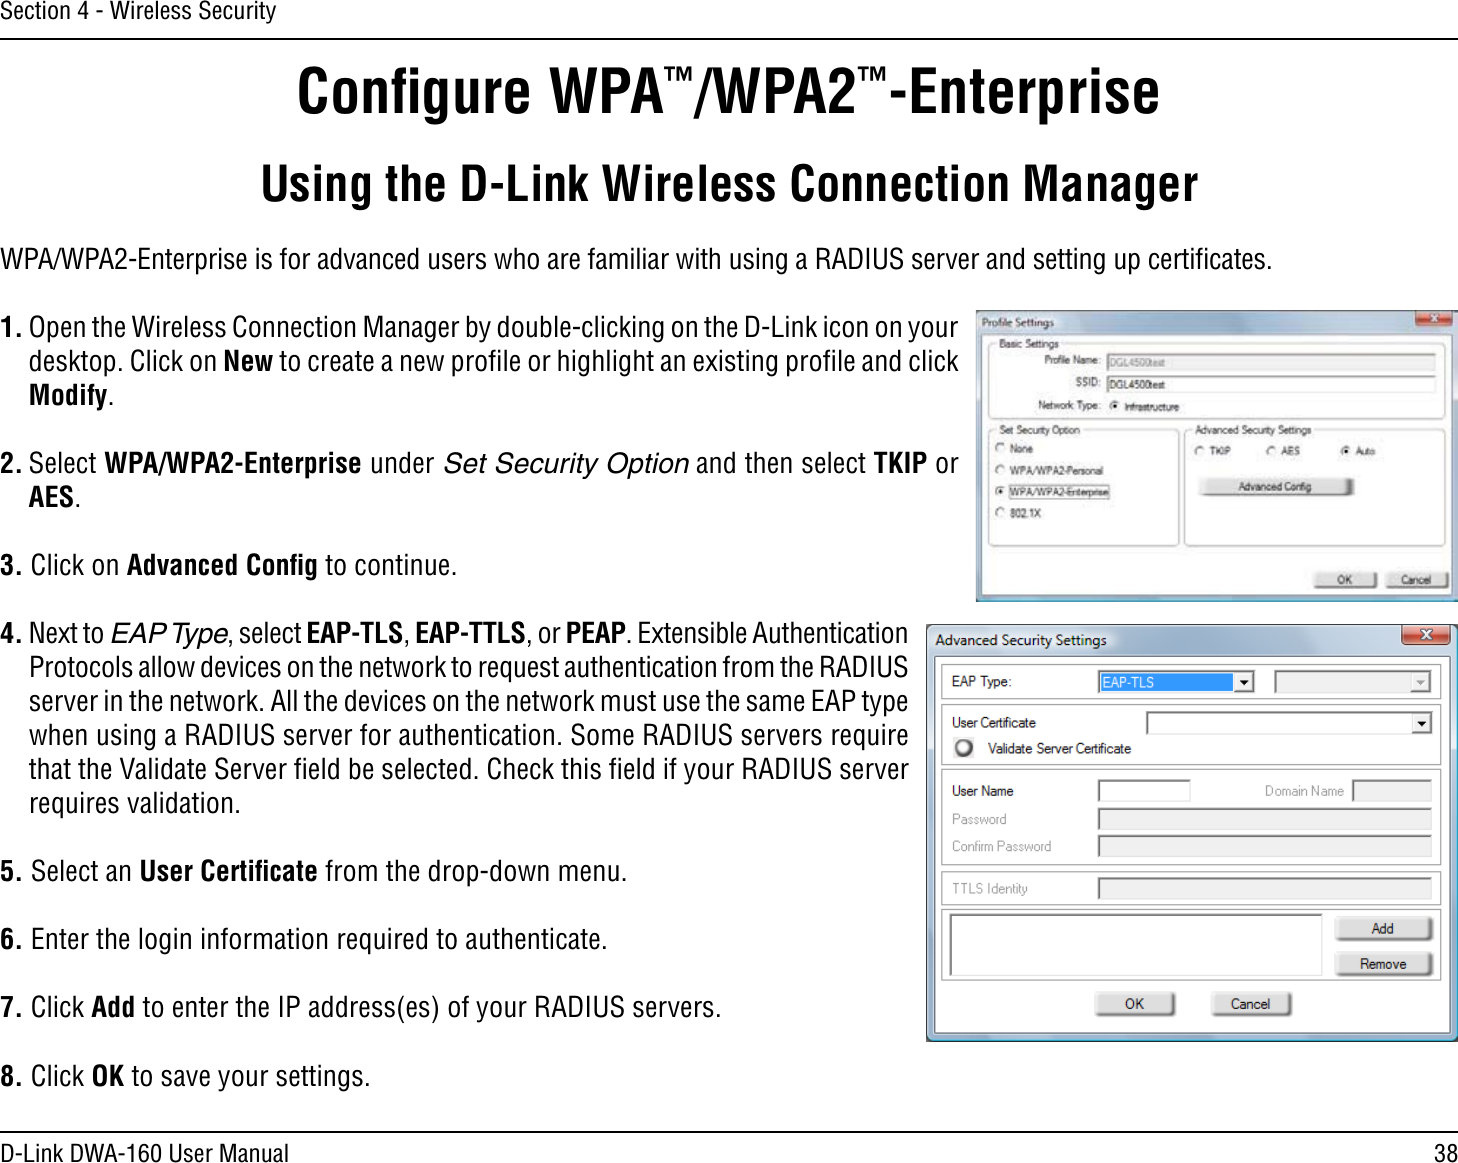 38D-Link DWA-160 User ManualSection 4 - Wireless SecurityConﬁgure WPA™/WPA2™-EnterpriseUsing the D-Link Wireless Connection ManagerWPA/WPA2-Enterprise is for advanced users who are familiar with using a RADIUS server and setting up certiﬁcates.1. Open the Wireless Connection Manager by double-clicking on the D-Link icon on your desktop. Click on New to create a new proﬁle or highlight an existing proﬁle and click Modify. 2. Select WPA/WPA2-Enterprise under Set Security Option and then select TKIP or AES.3. Click on Advanced Conﬁg to continue.4. Next to EAP Type, select EAP-TLS, EAP-TTLS, or PEAP. Extensible Authentication Protocols allow devices on the network to request authentication from the RADIUS server in the network. All the devices on the network must use the same EAP type when using a RADIUS server for authentication. Some RADIUS servers require that the Validate Server ﬁeld be selected. Check this ﬁeld if your RADIUS server requires validation.5. Select an User Certiﬁcate from the drop-down menu.6. Enter the login information required to authenticate.7. Click Add to enter the IP address(es) of your RADIUS servers.8. Click OK to save your settings.